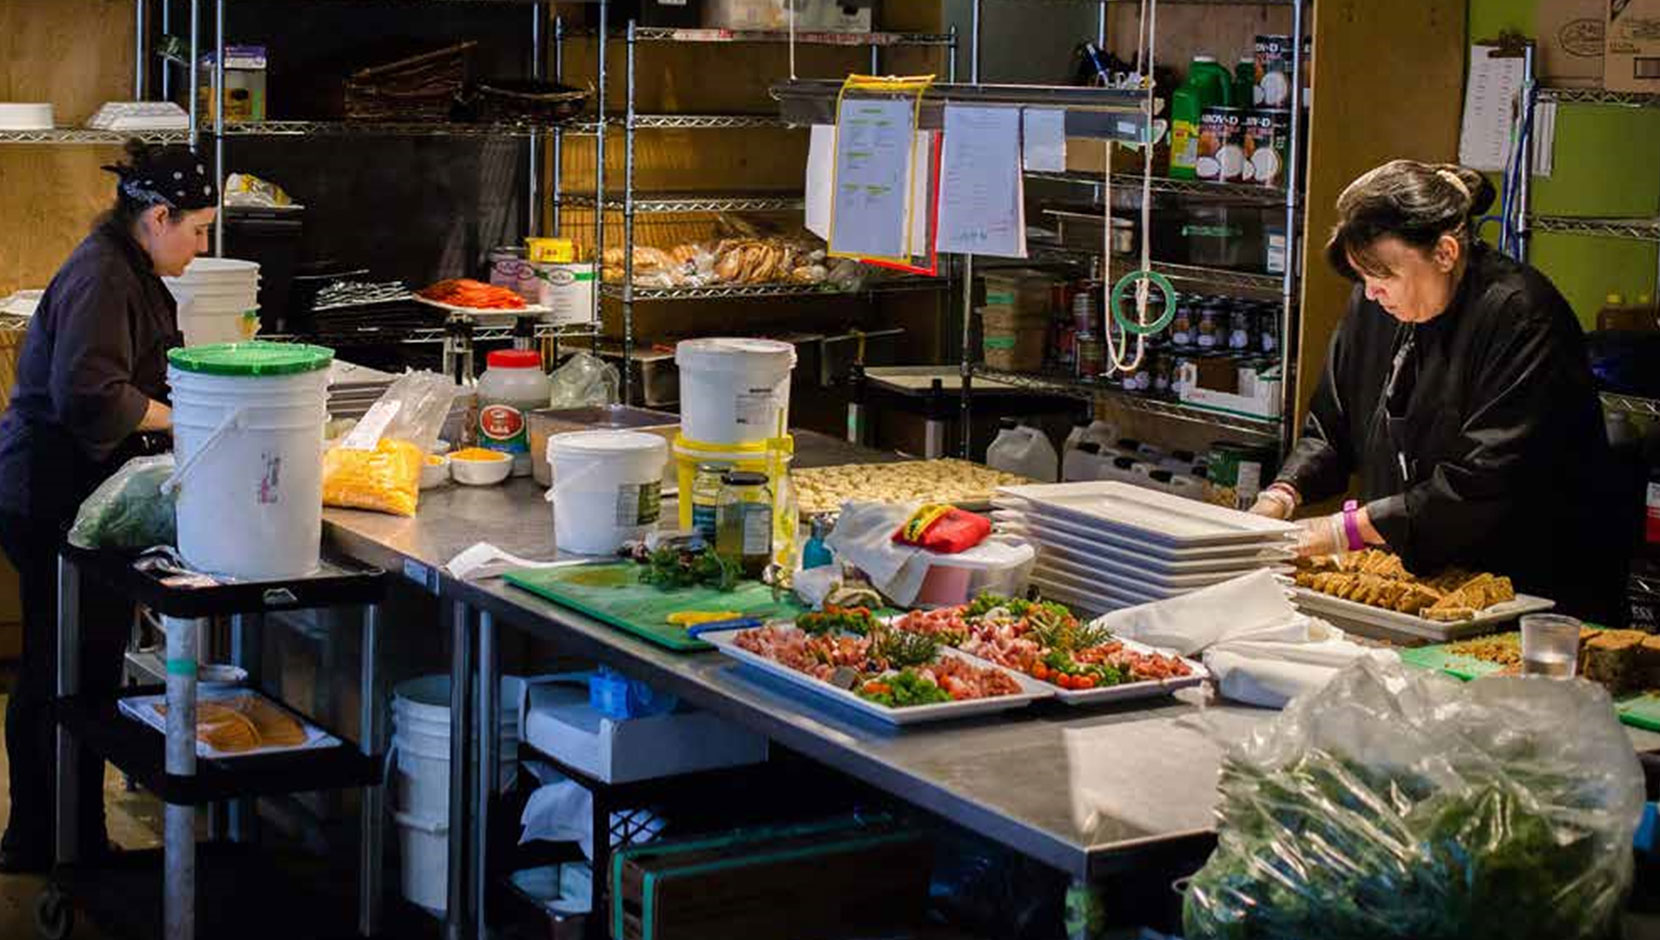 Two catering staff are preparing meals in a commercial kitchen for Potluck Cafe Society.